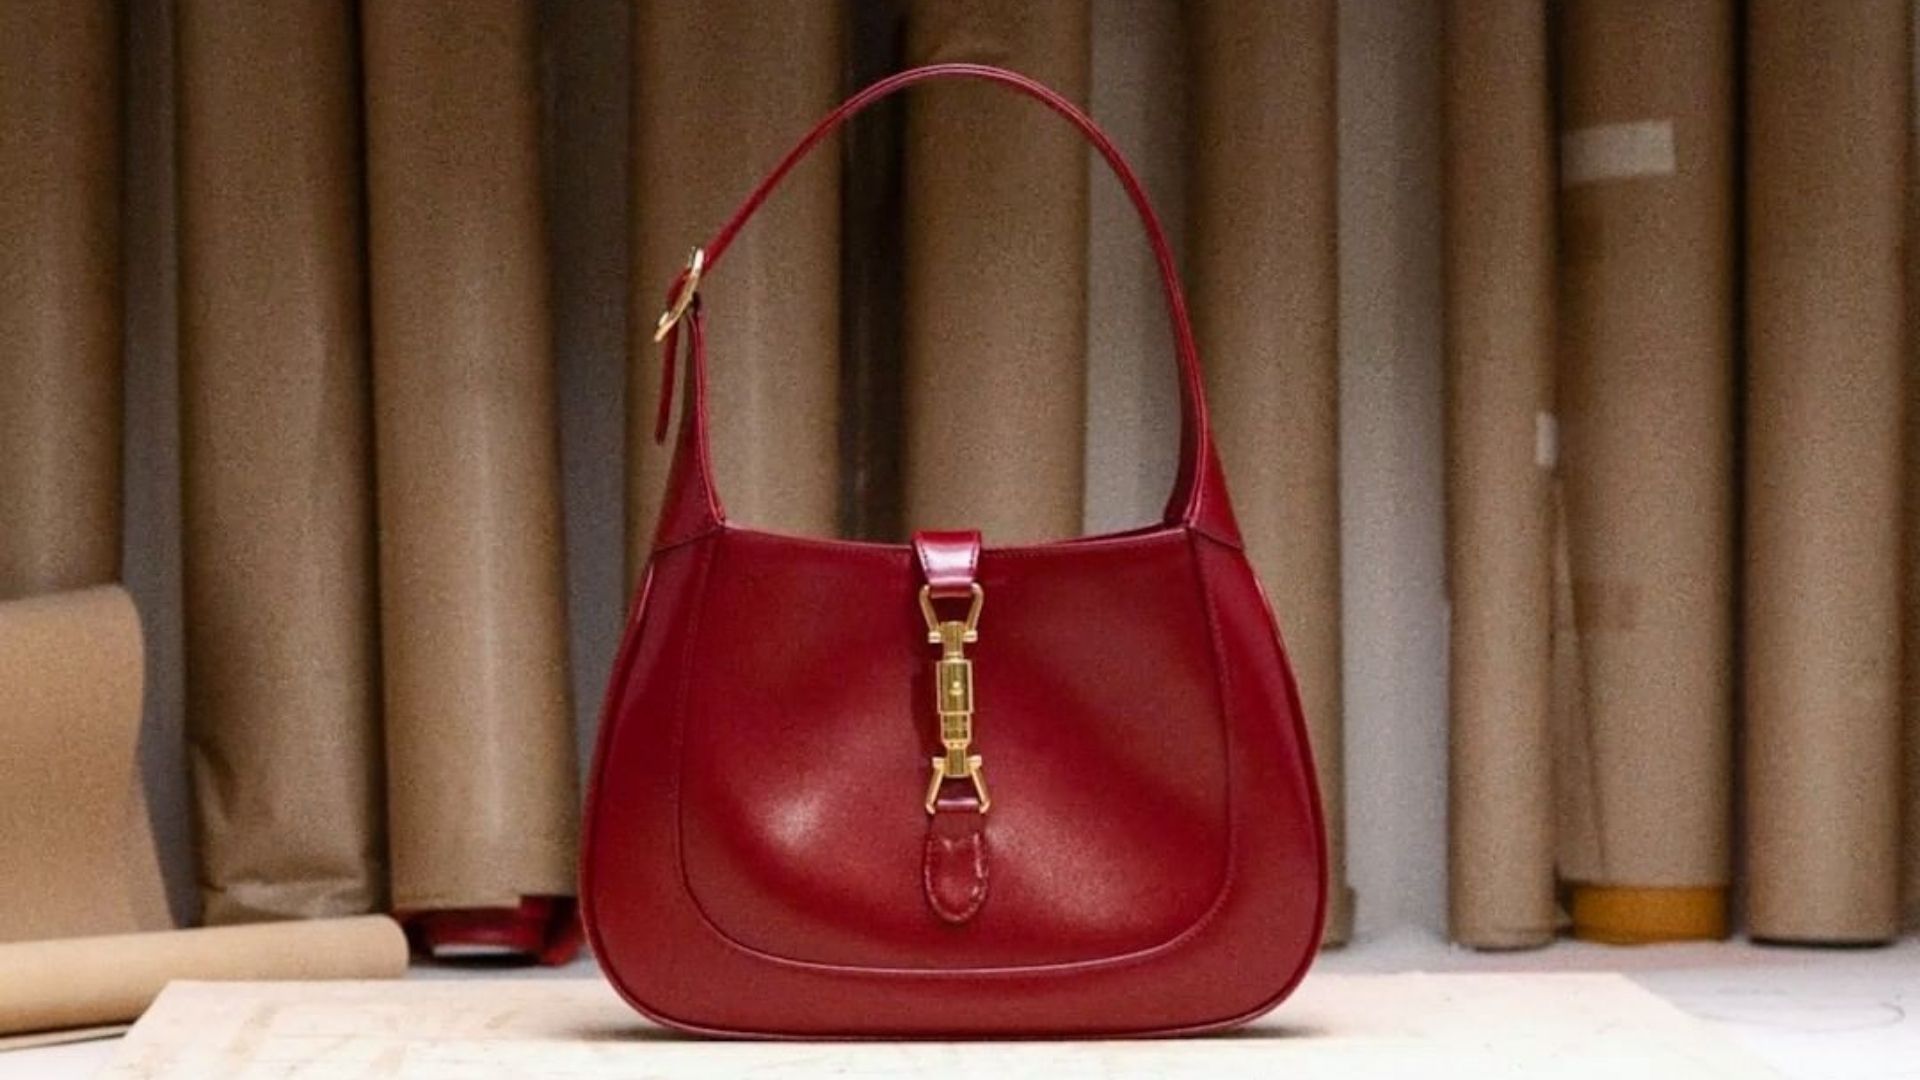 10 most popular Gucci bags to add to your collection this 2022